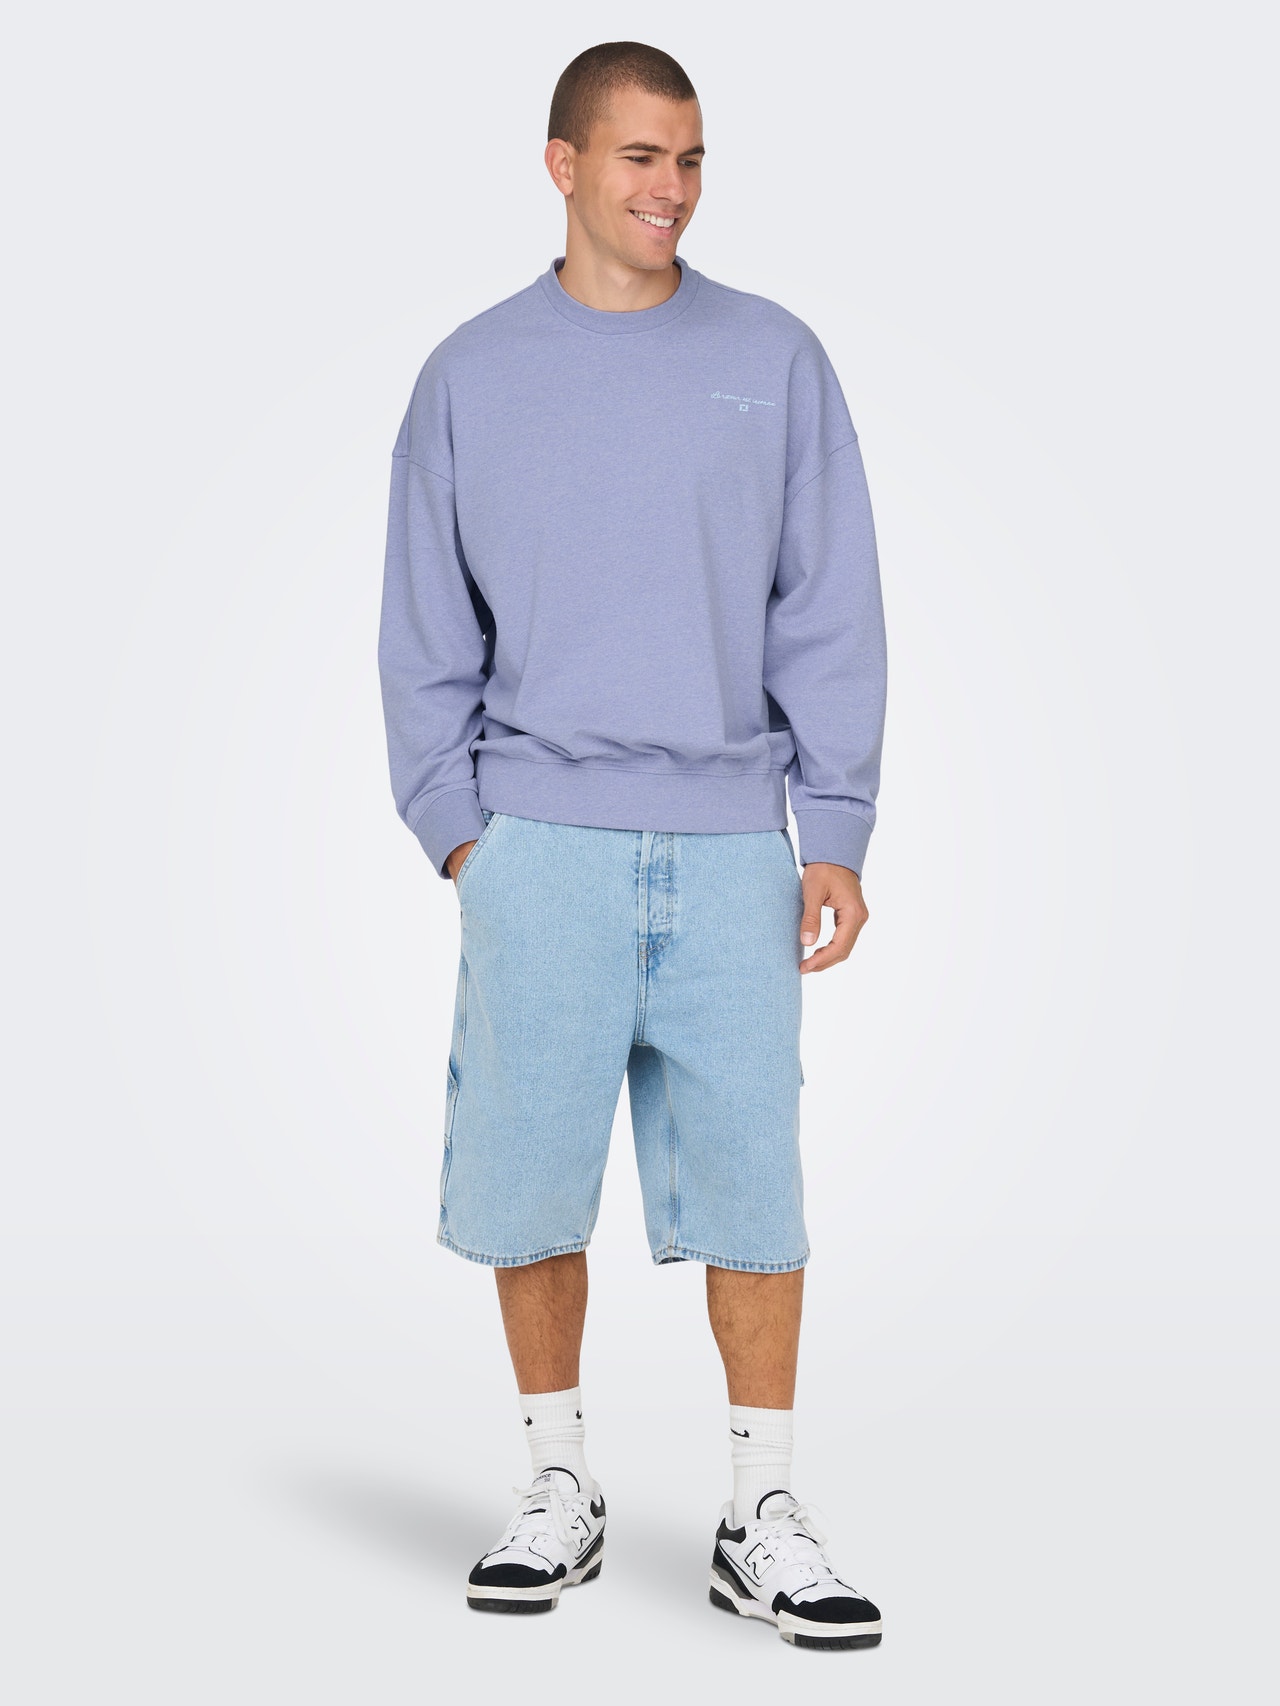 ONLY & SONS Relaxed Fit Crew neck Lave skuldre Sweatshirt -Jacaranda - 22025298